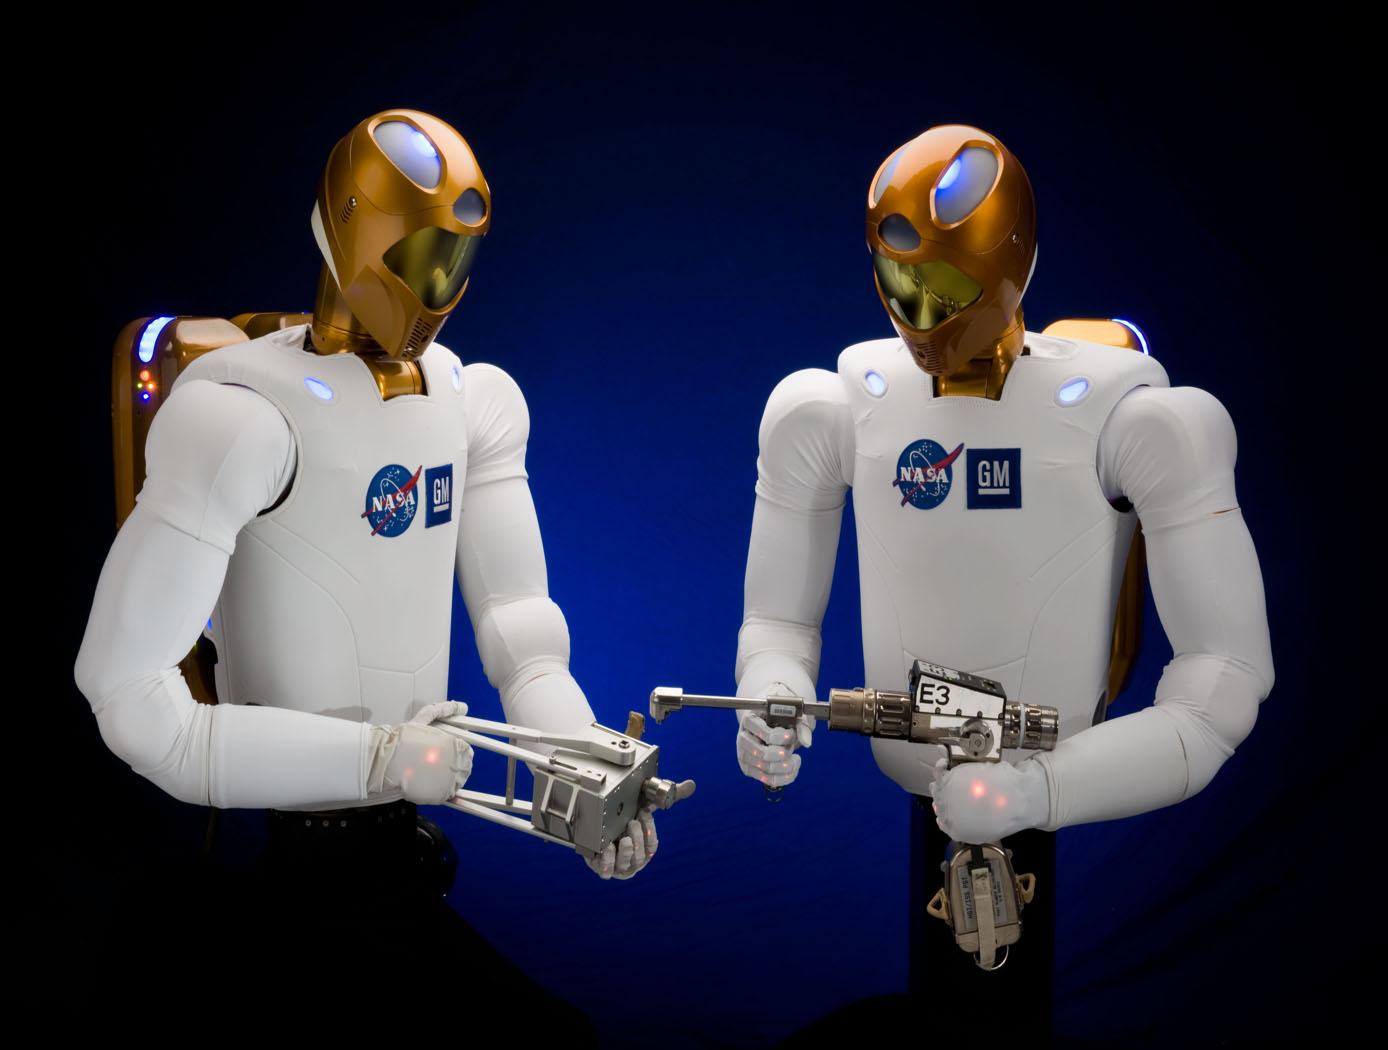 Robonaut 2 is a dexterous robot able to work with tools and equipment designed for human use.